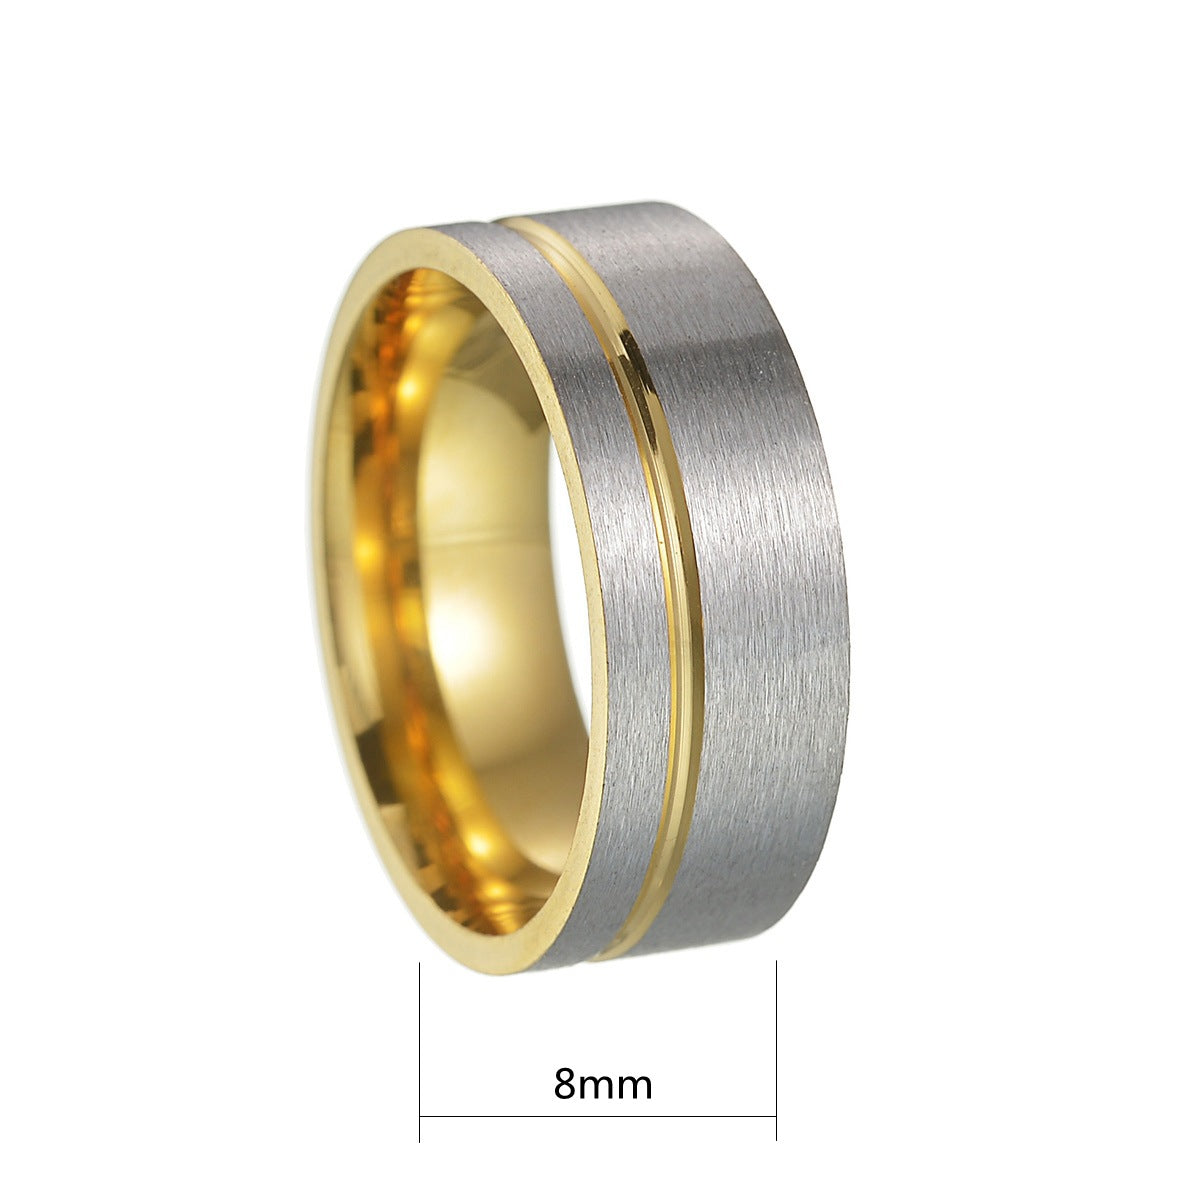 8mm Stainless Steel Men's Ring with Frosted Gold and Silver Finish